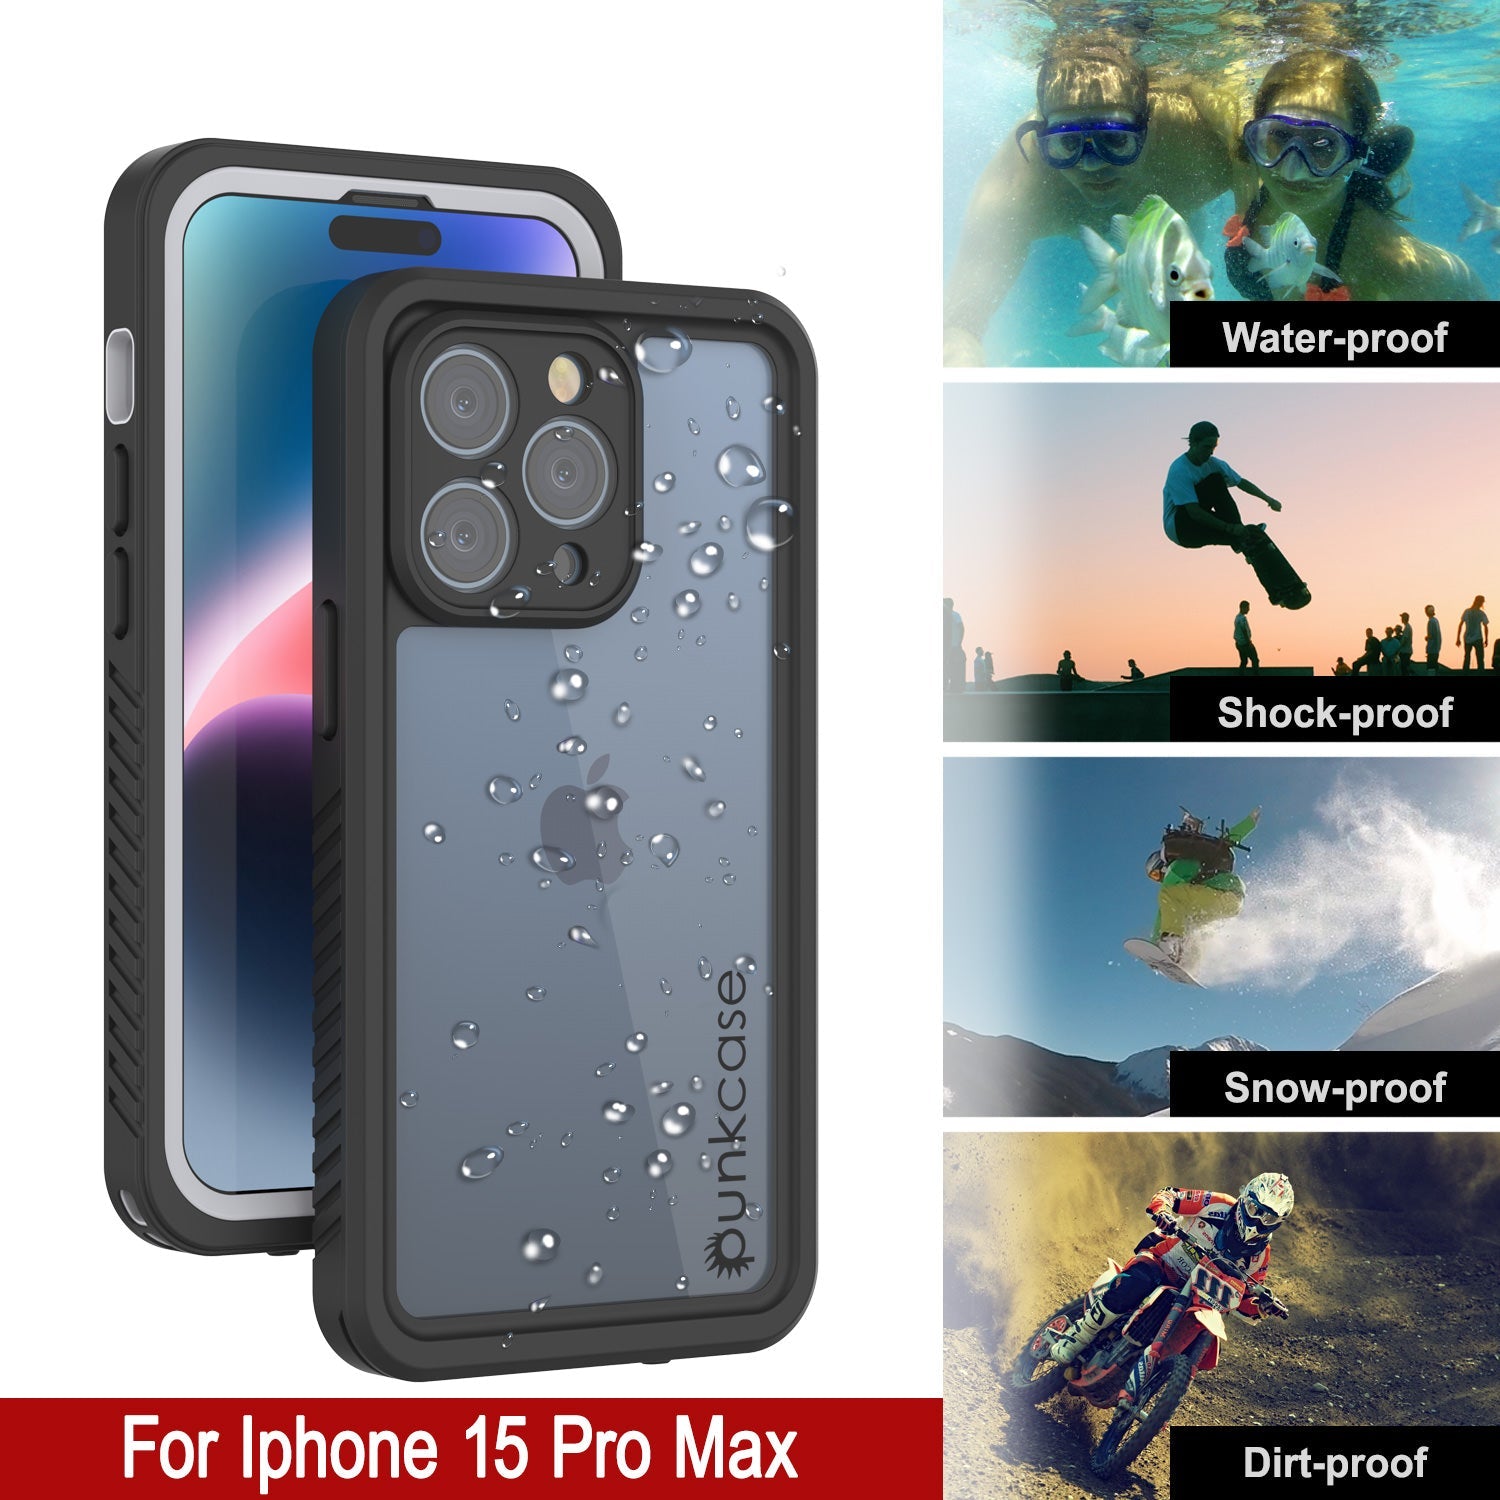 iPhone 15 Pro Max Waterproof Case, Punkcase [Extreme Series] Armor Cover W/ Built In Screen Protector [White]